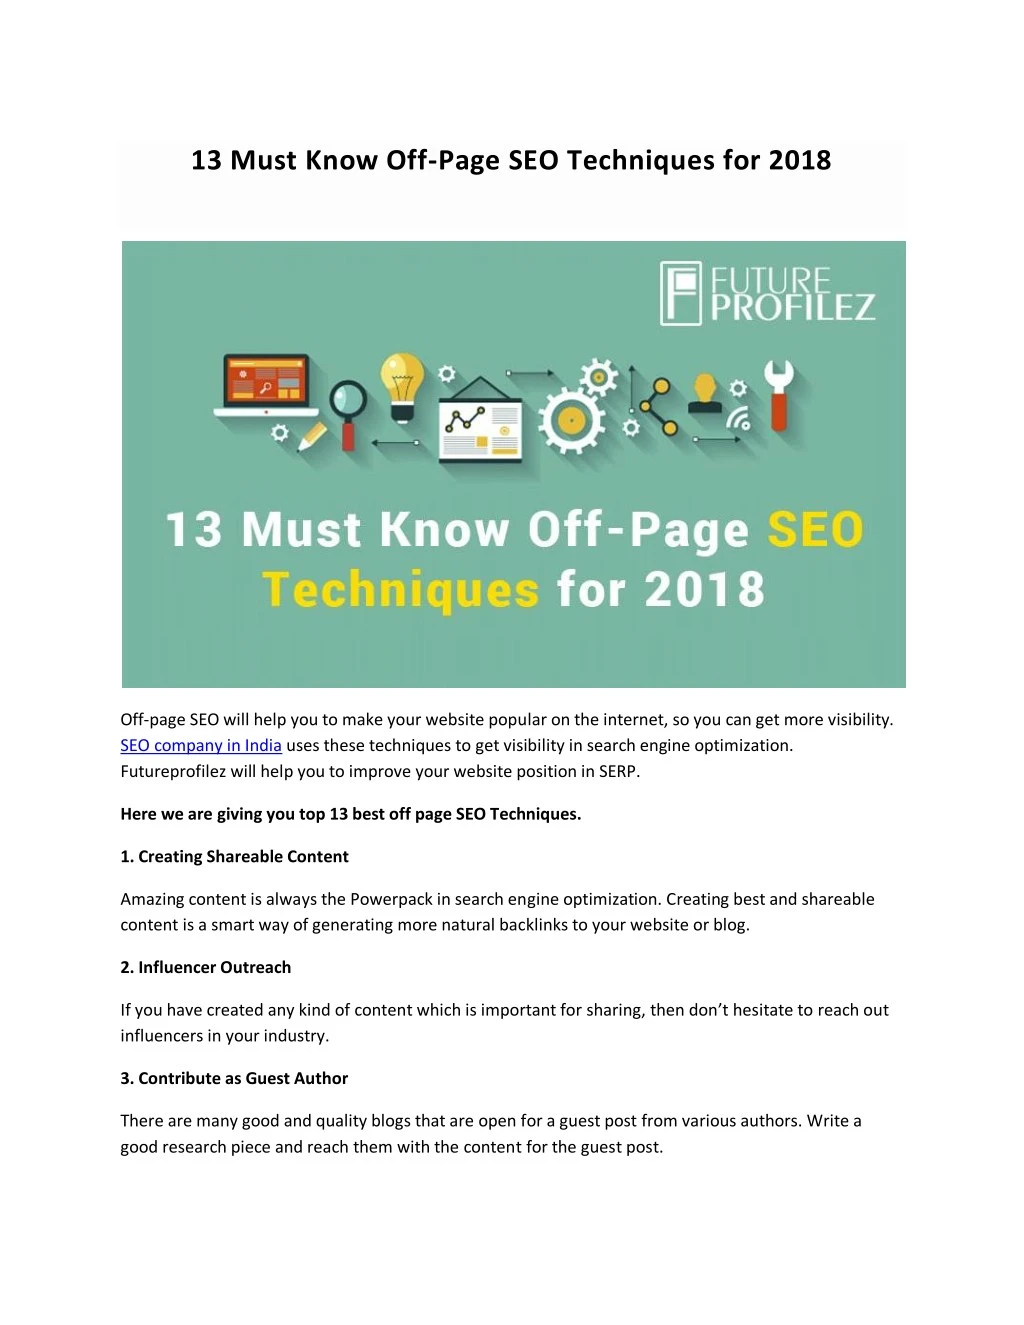 13 must know off page seo techniques for 2018